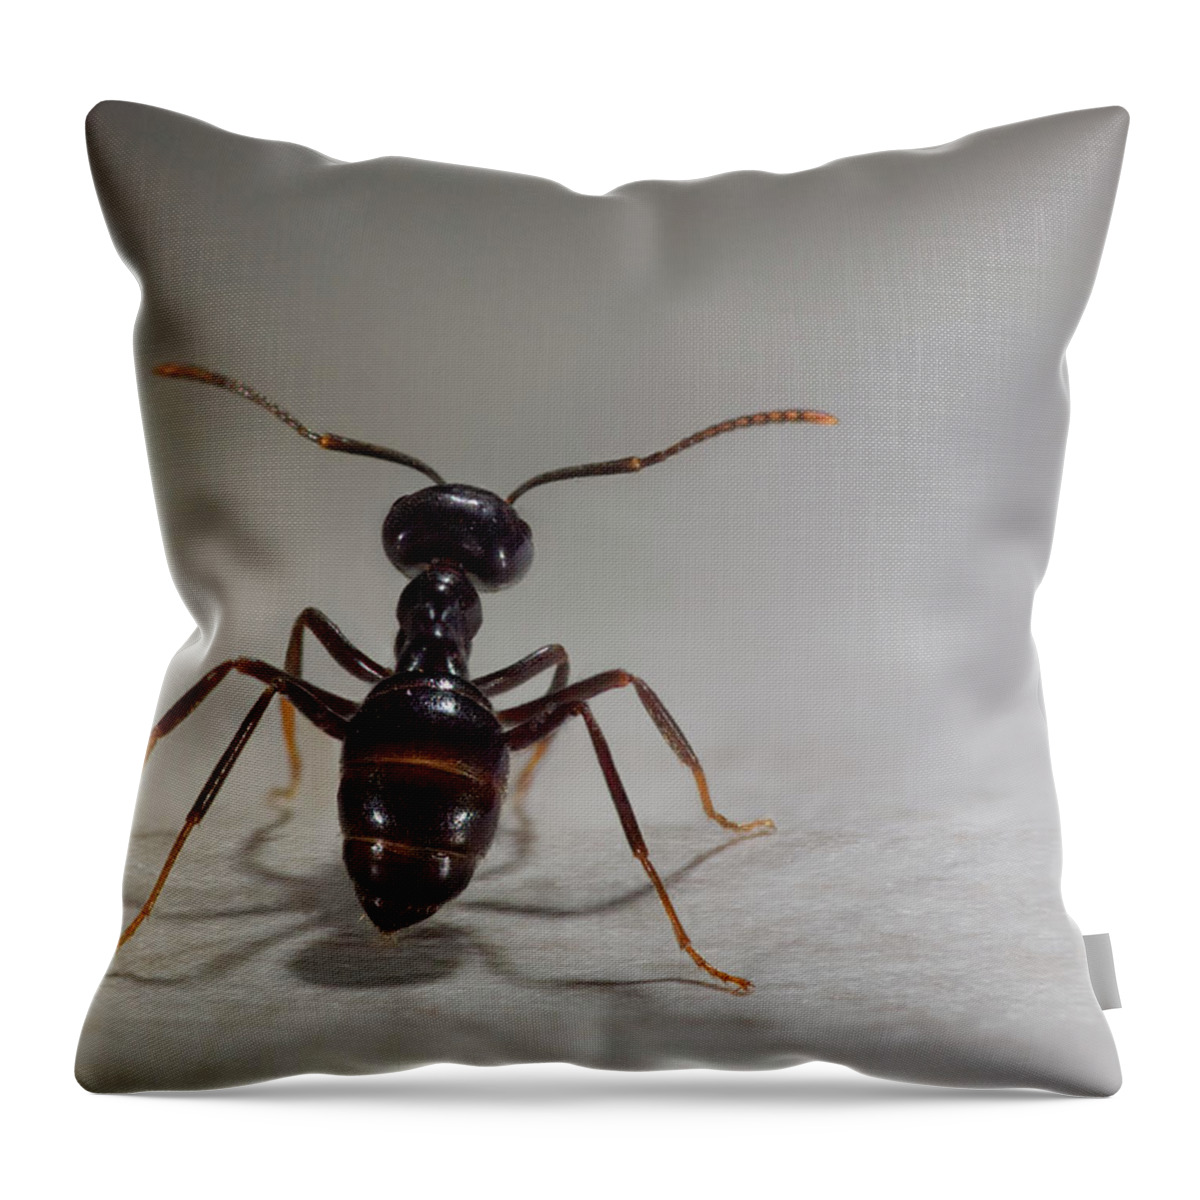 Shadow Throw Pillow featuring the photograph Unfriendly by By Mediotuerto